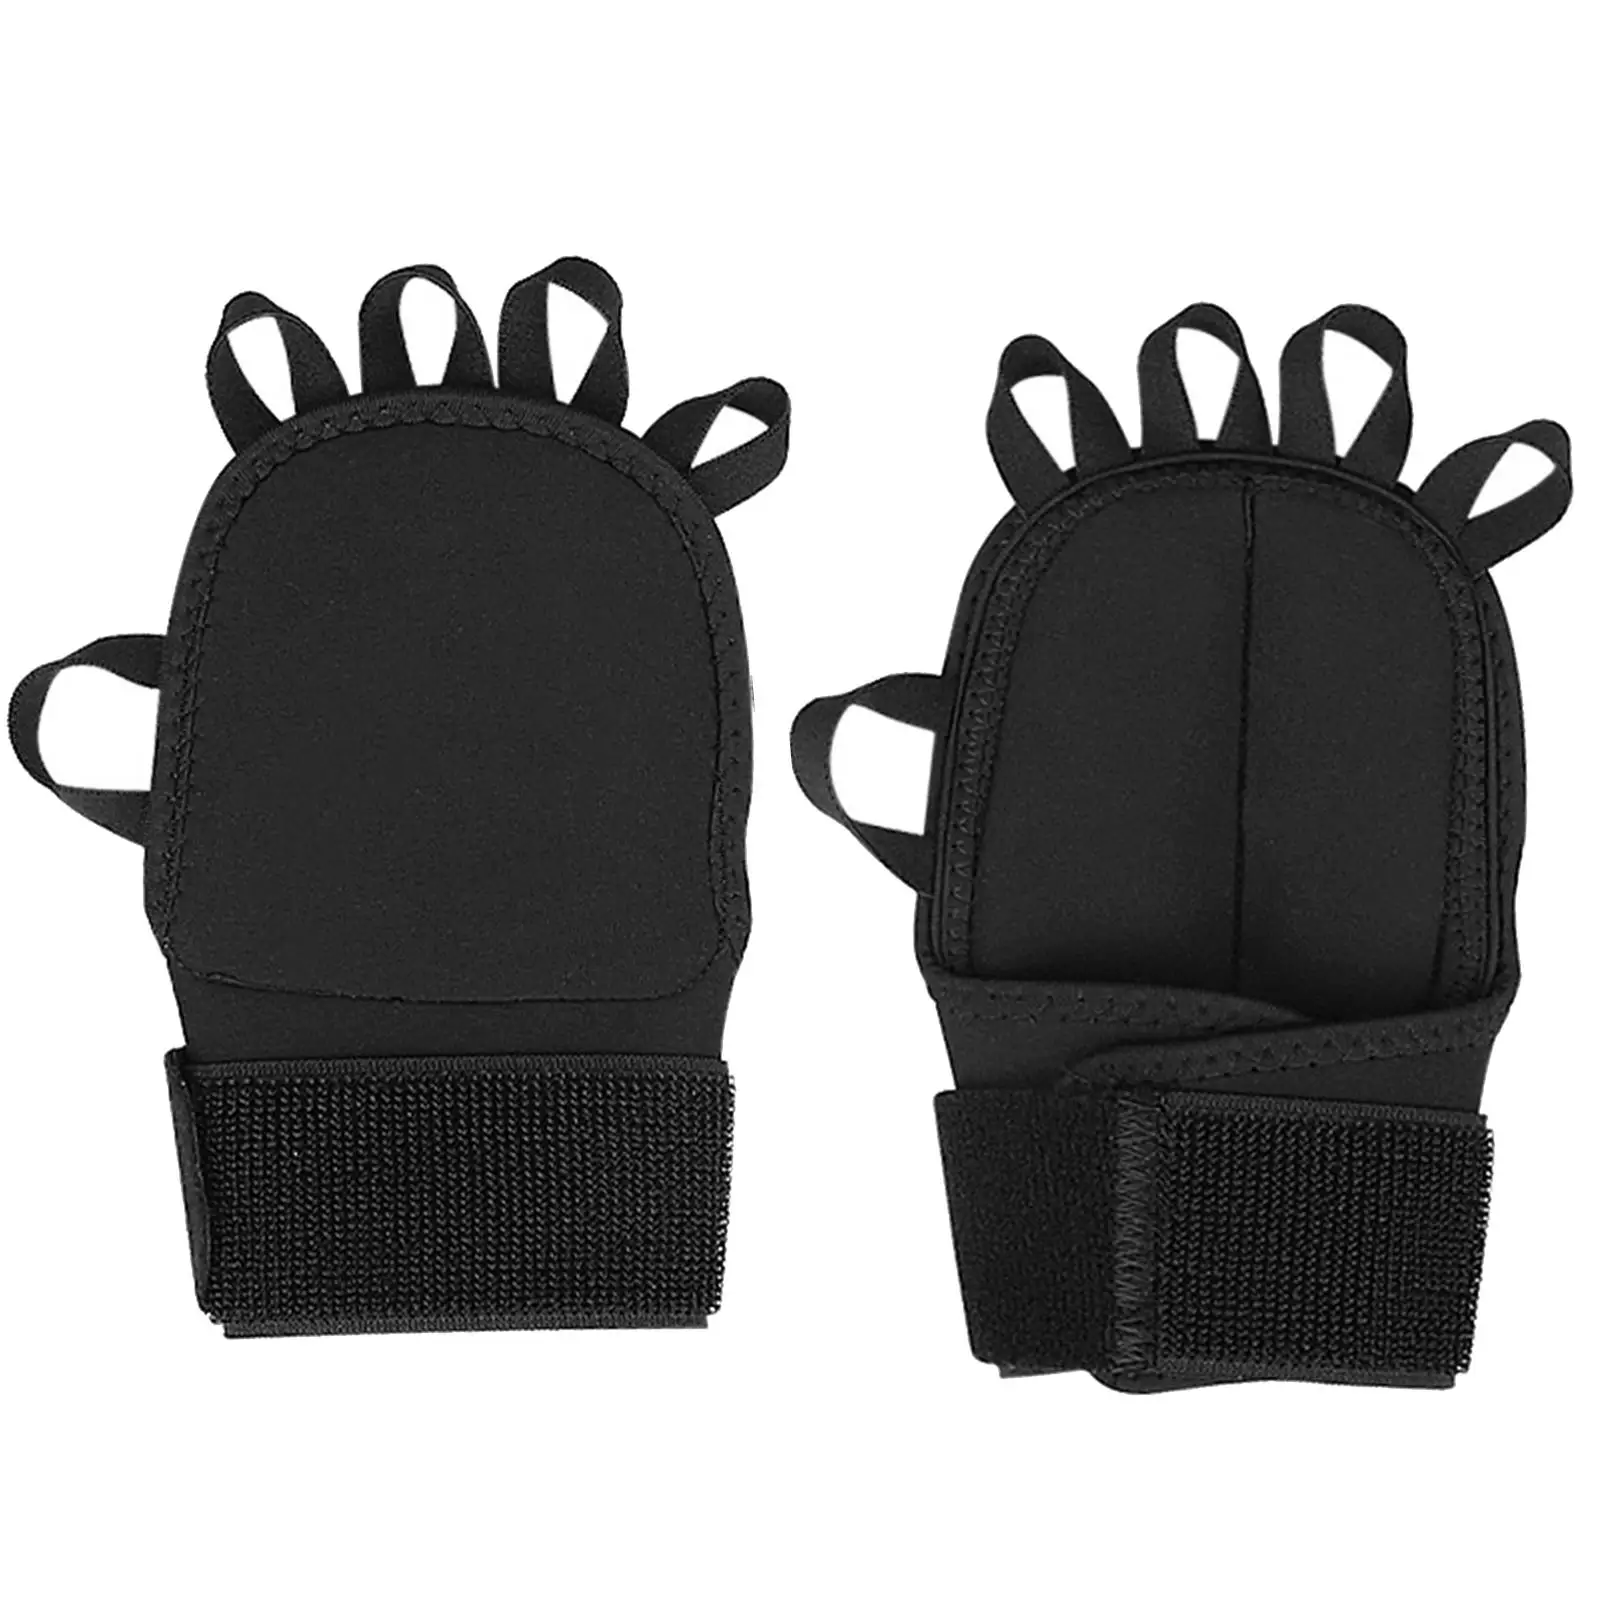 Weightlifting Gloves Fingerless Gloves Breathable Anti Skid Workout Gloves